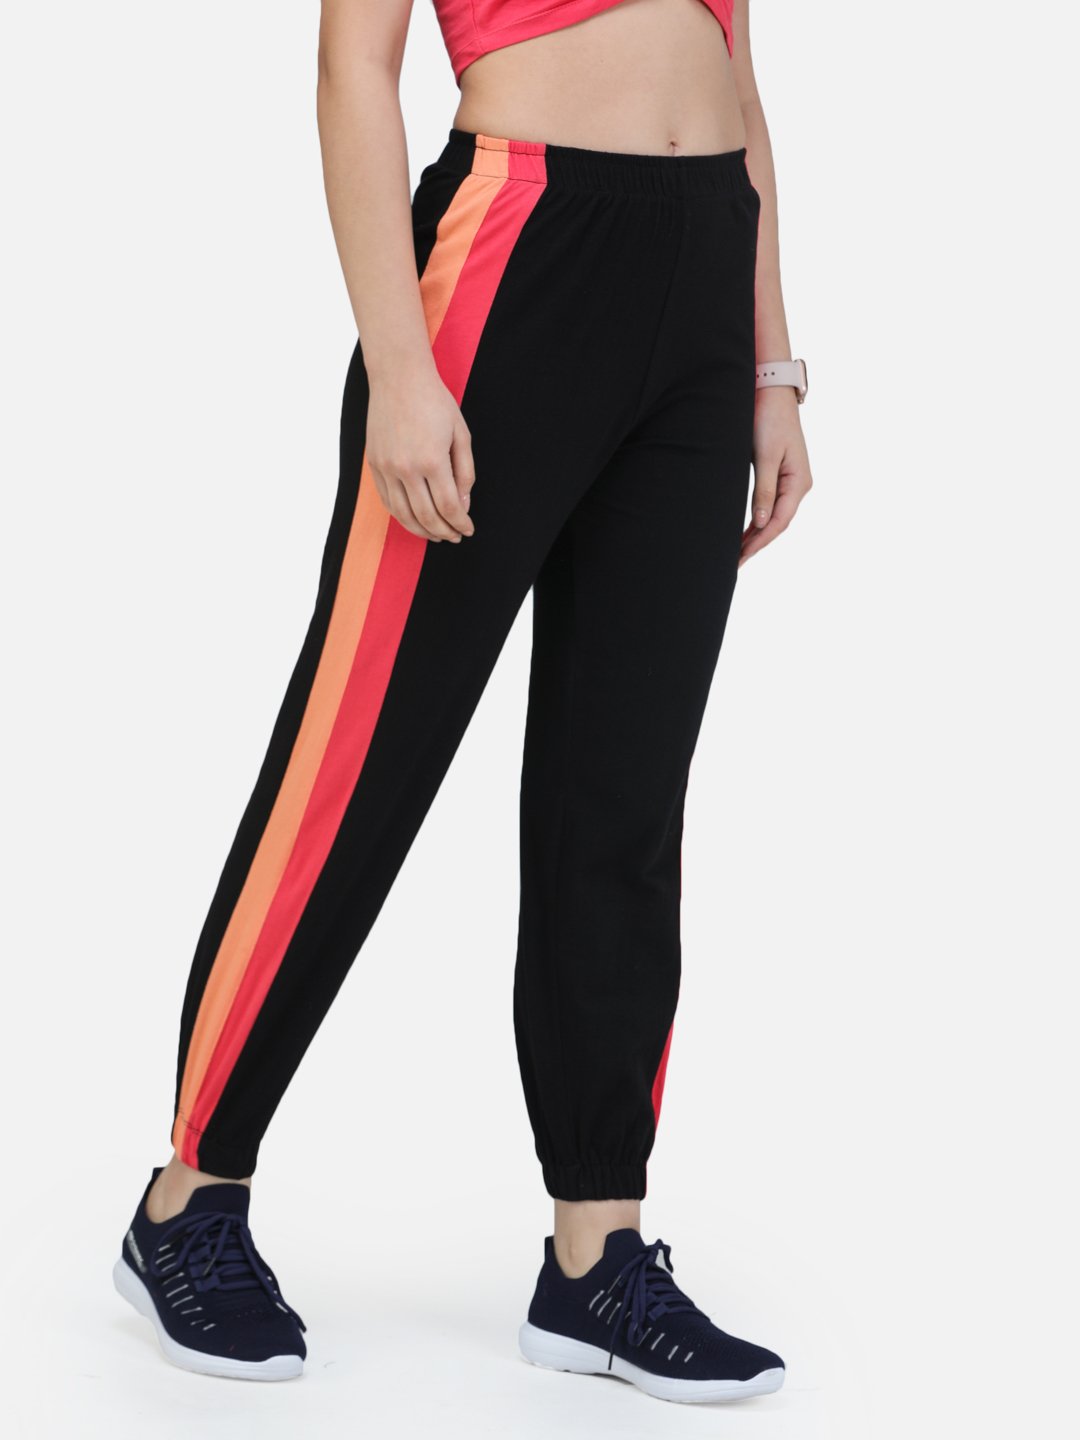 SCORPIUS BLACK TRACK PANT WITH TWO COLORED STRIPES  Cation Clothing